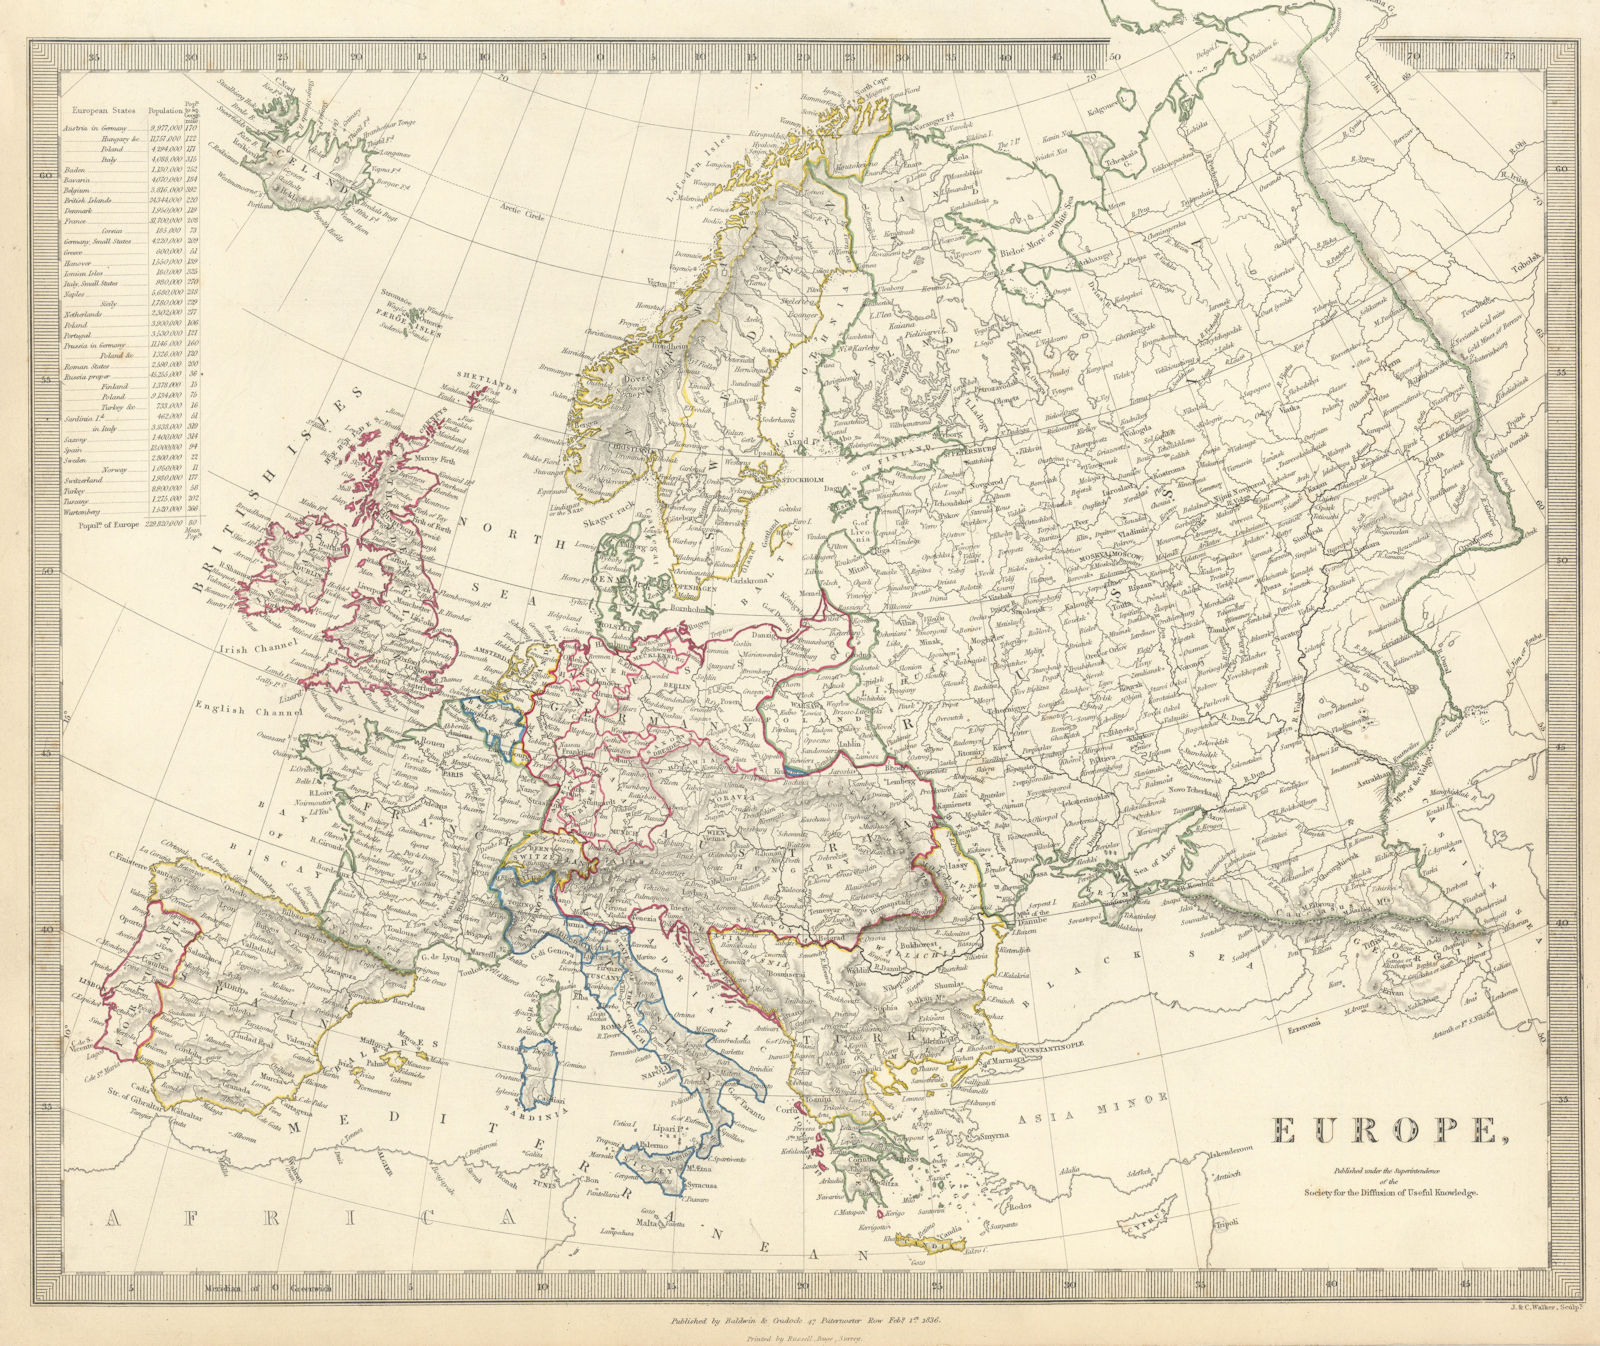 EUROPE. General map. Inset table of population & density by country . SDUK 1844